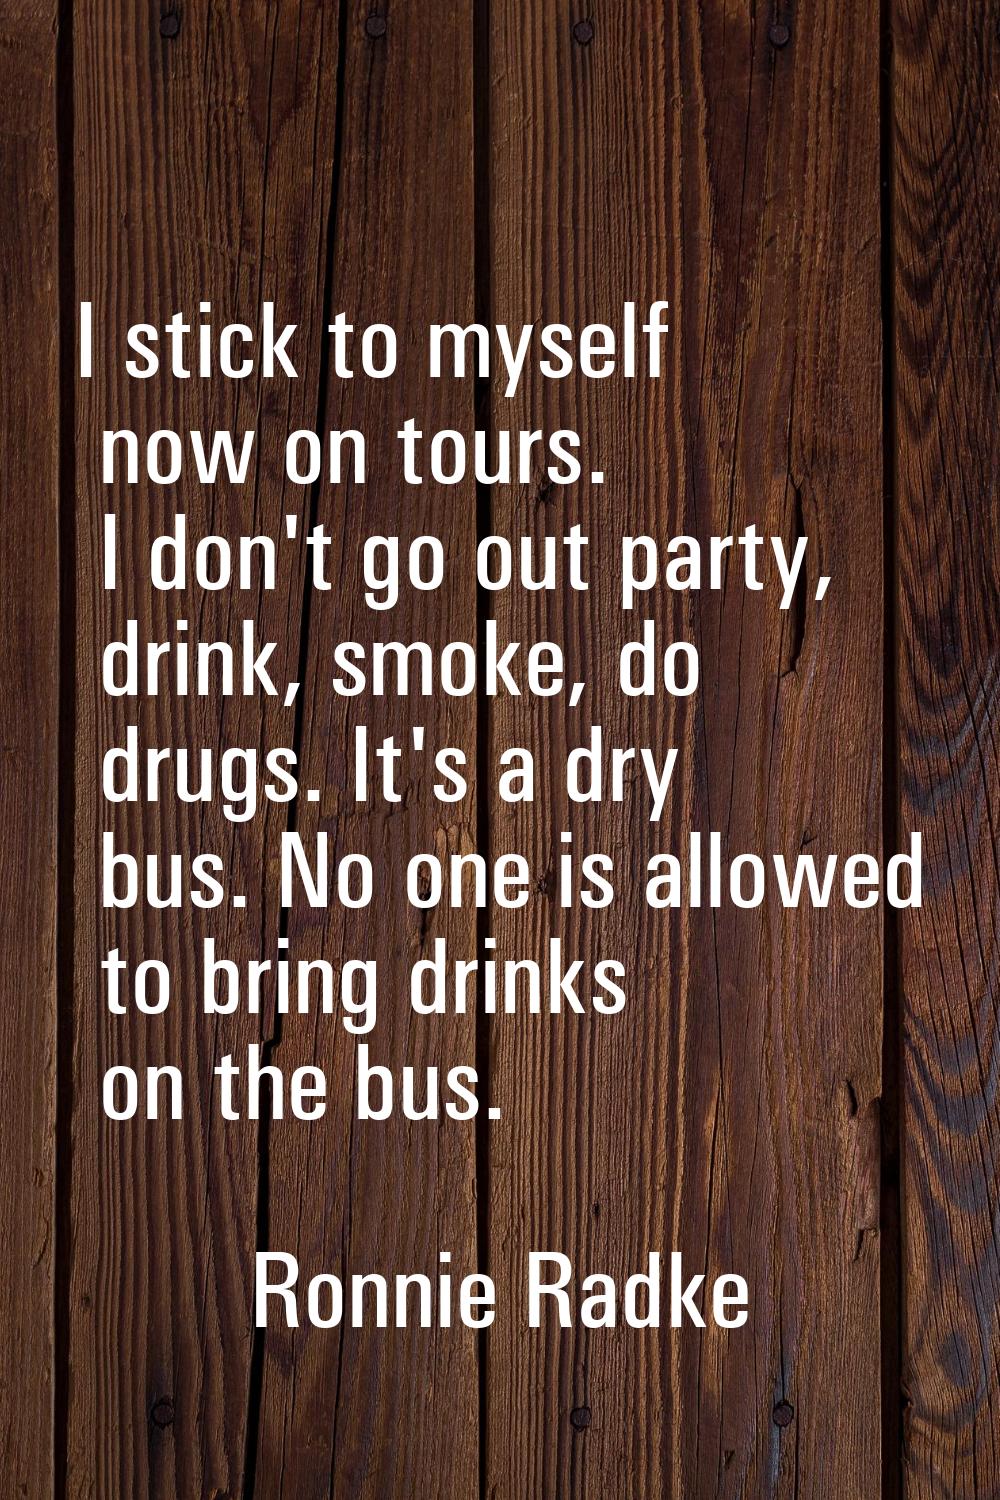 I stick to myself now on tours. I don't go out party, drink, smoke, do drugs. It's a dry bus. No on